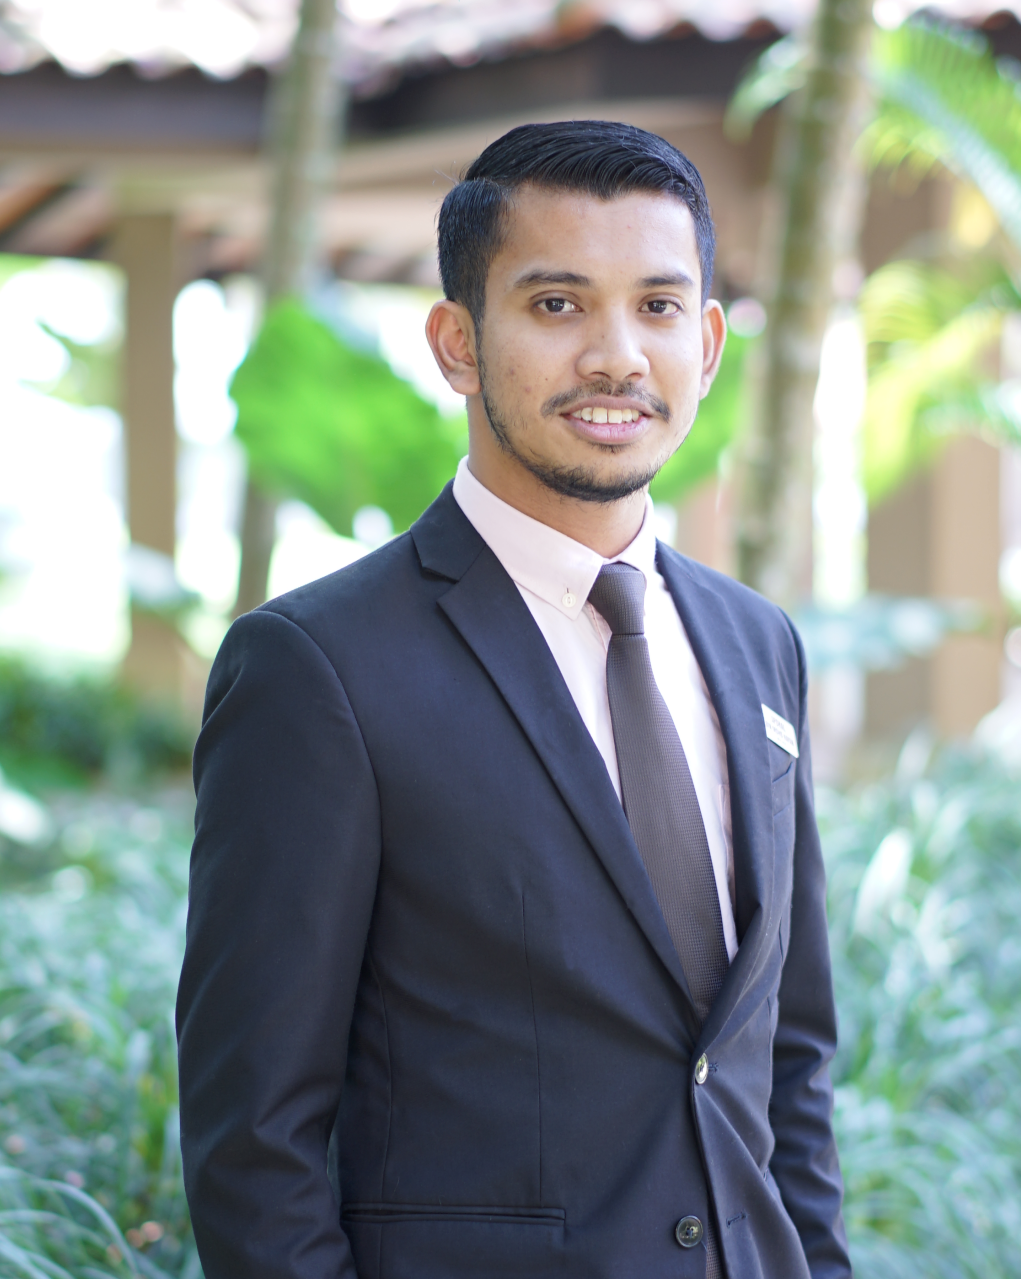 MDEC appoints Mohd Afdhal Mohd Nayan as Chief Transformation Officer